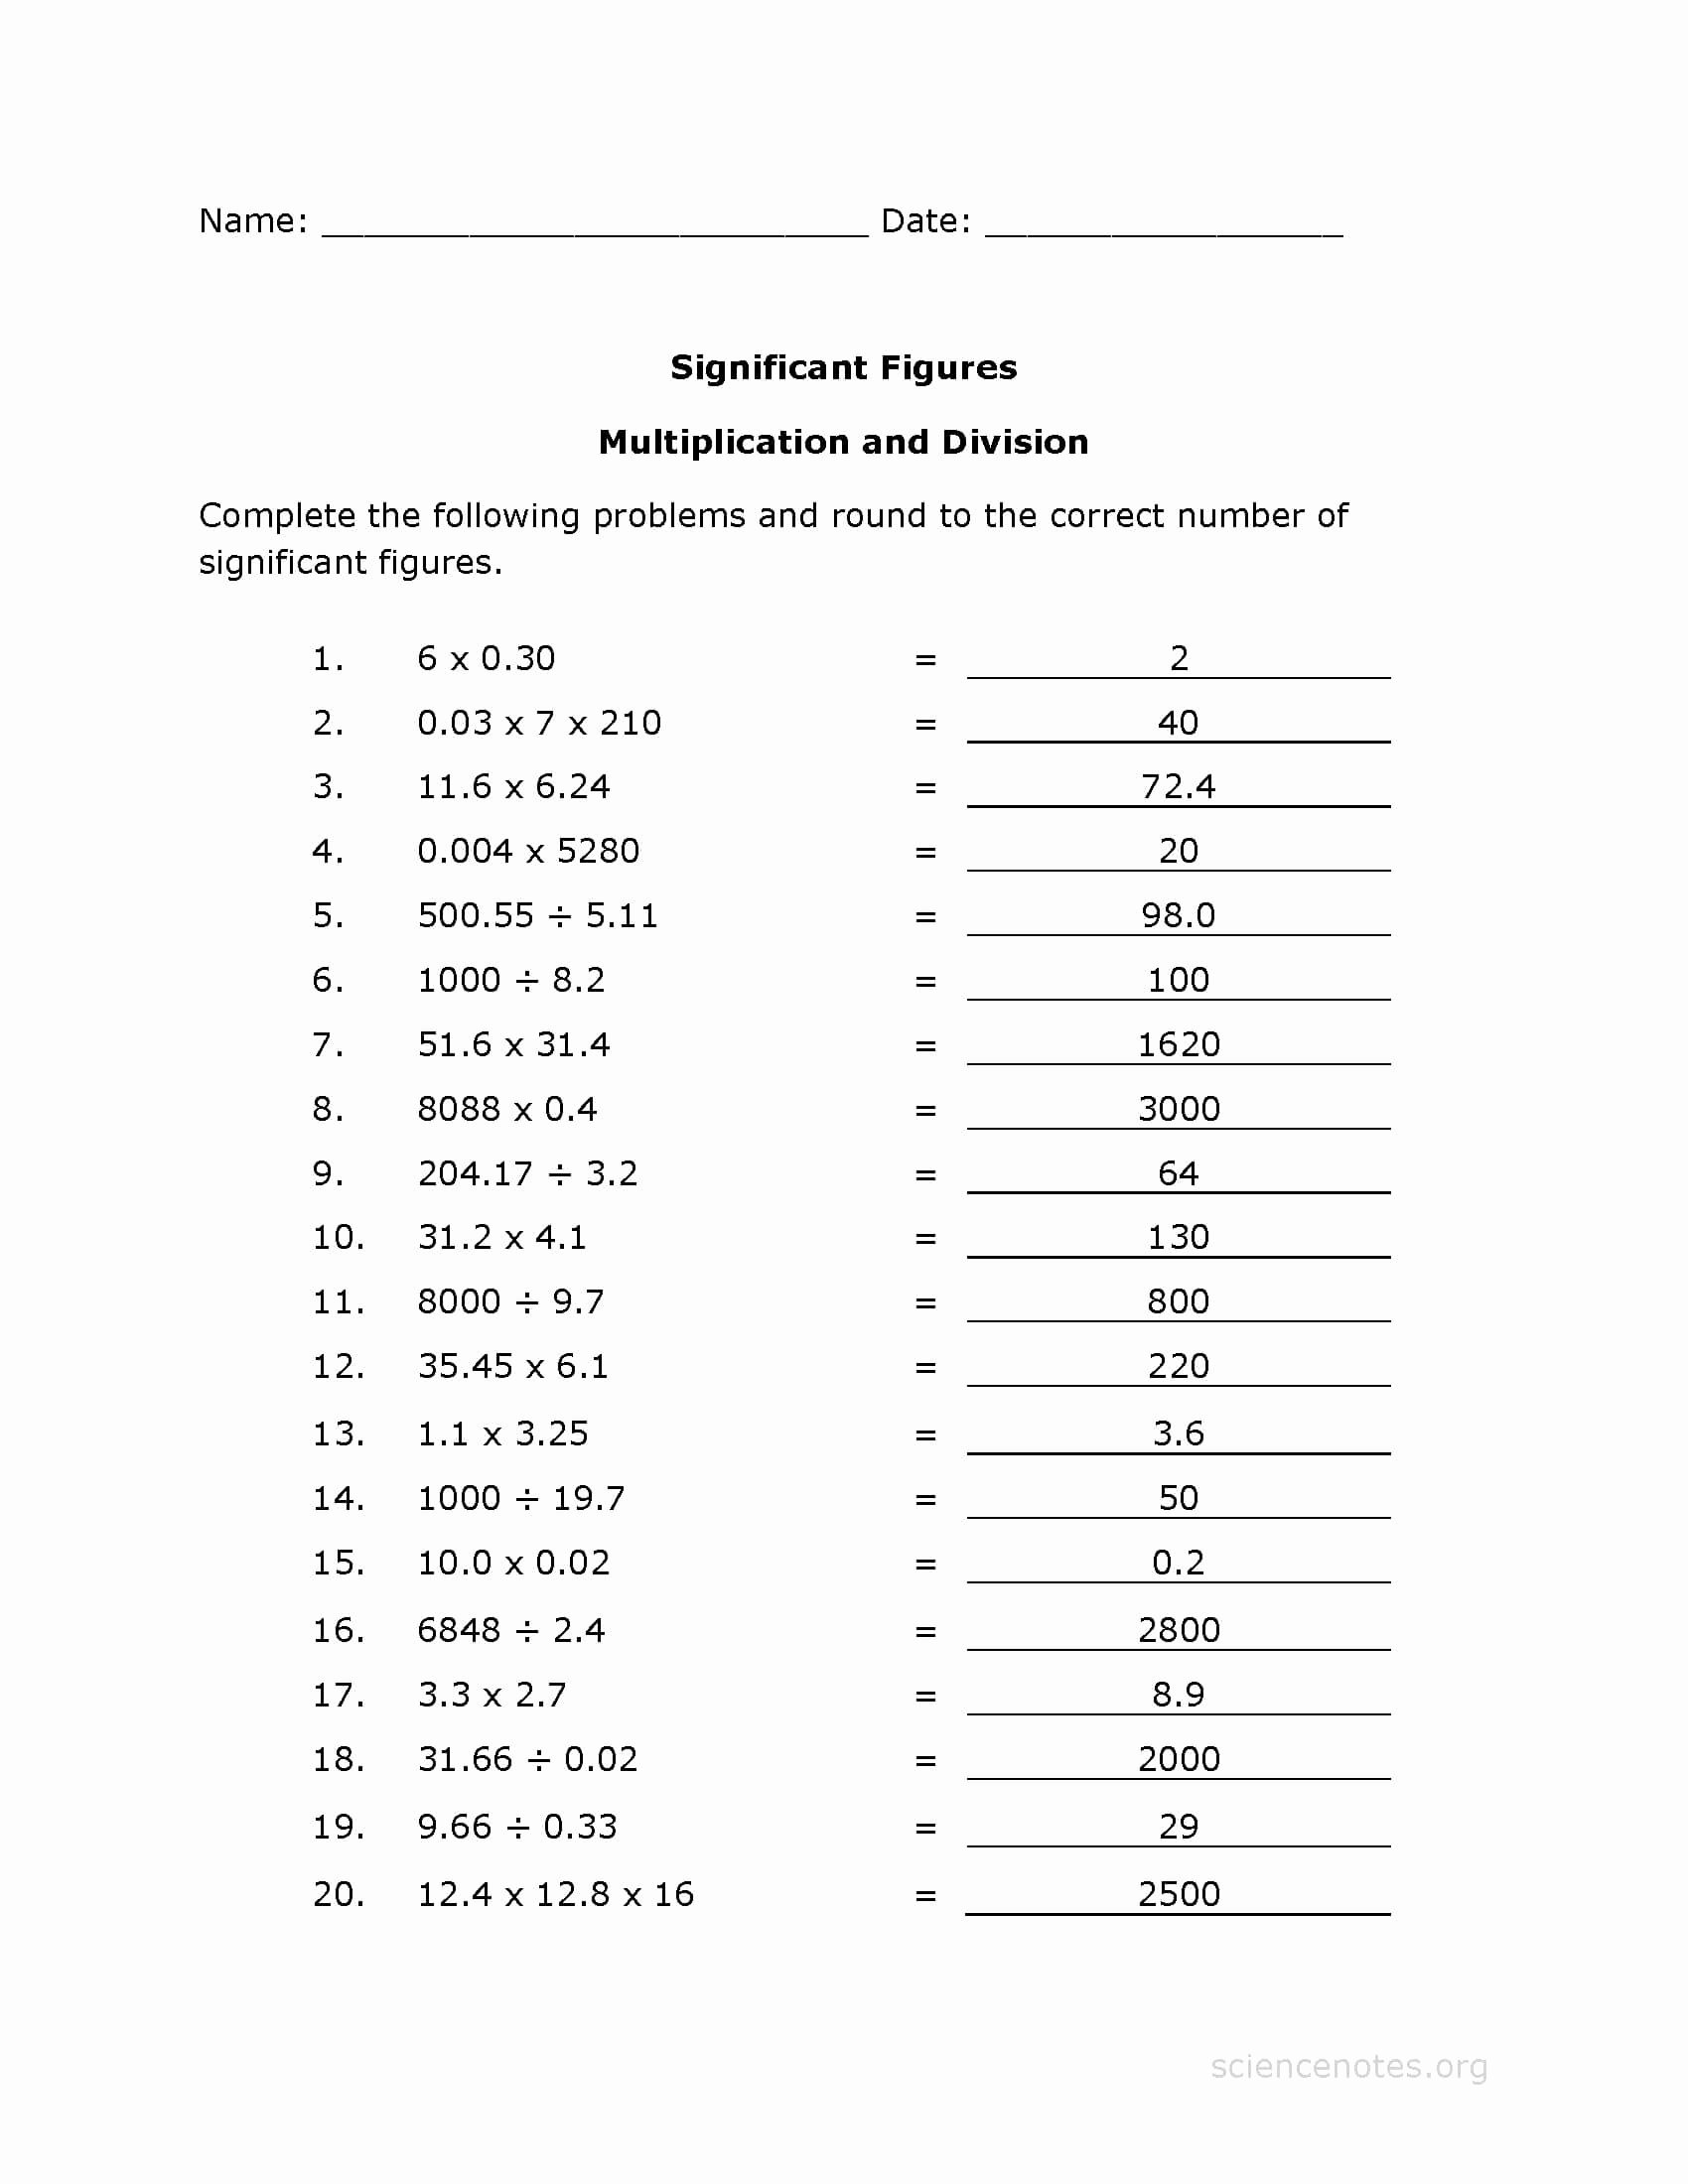 Significant Figures Worksheet Answers Elegant Significant Figures Multiplication Worksheet Page 2 Of 2